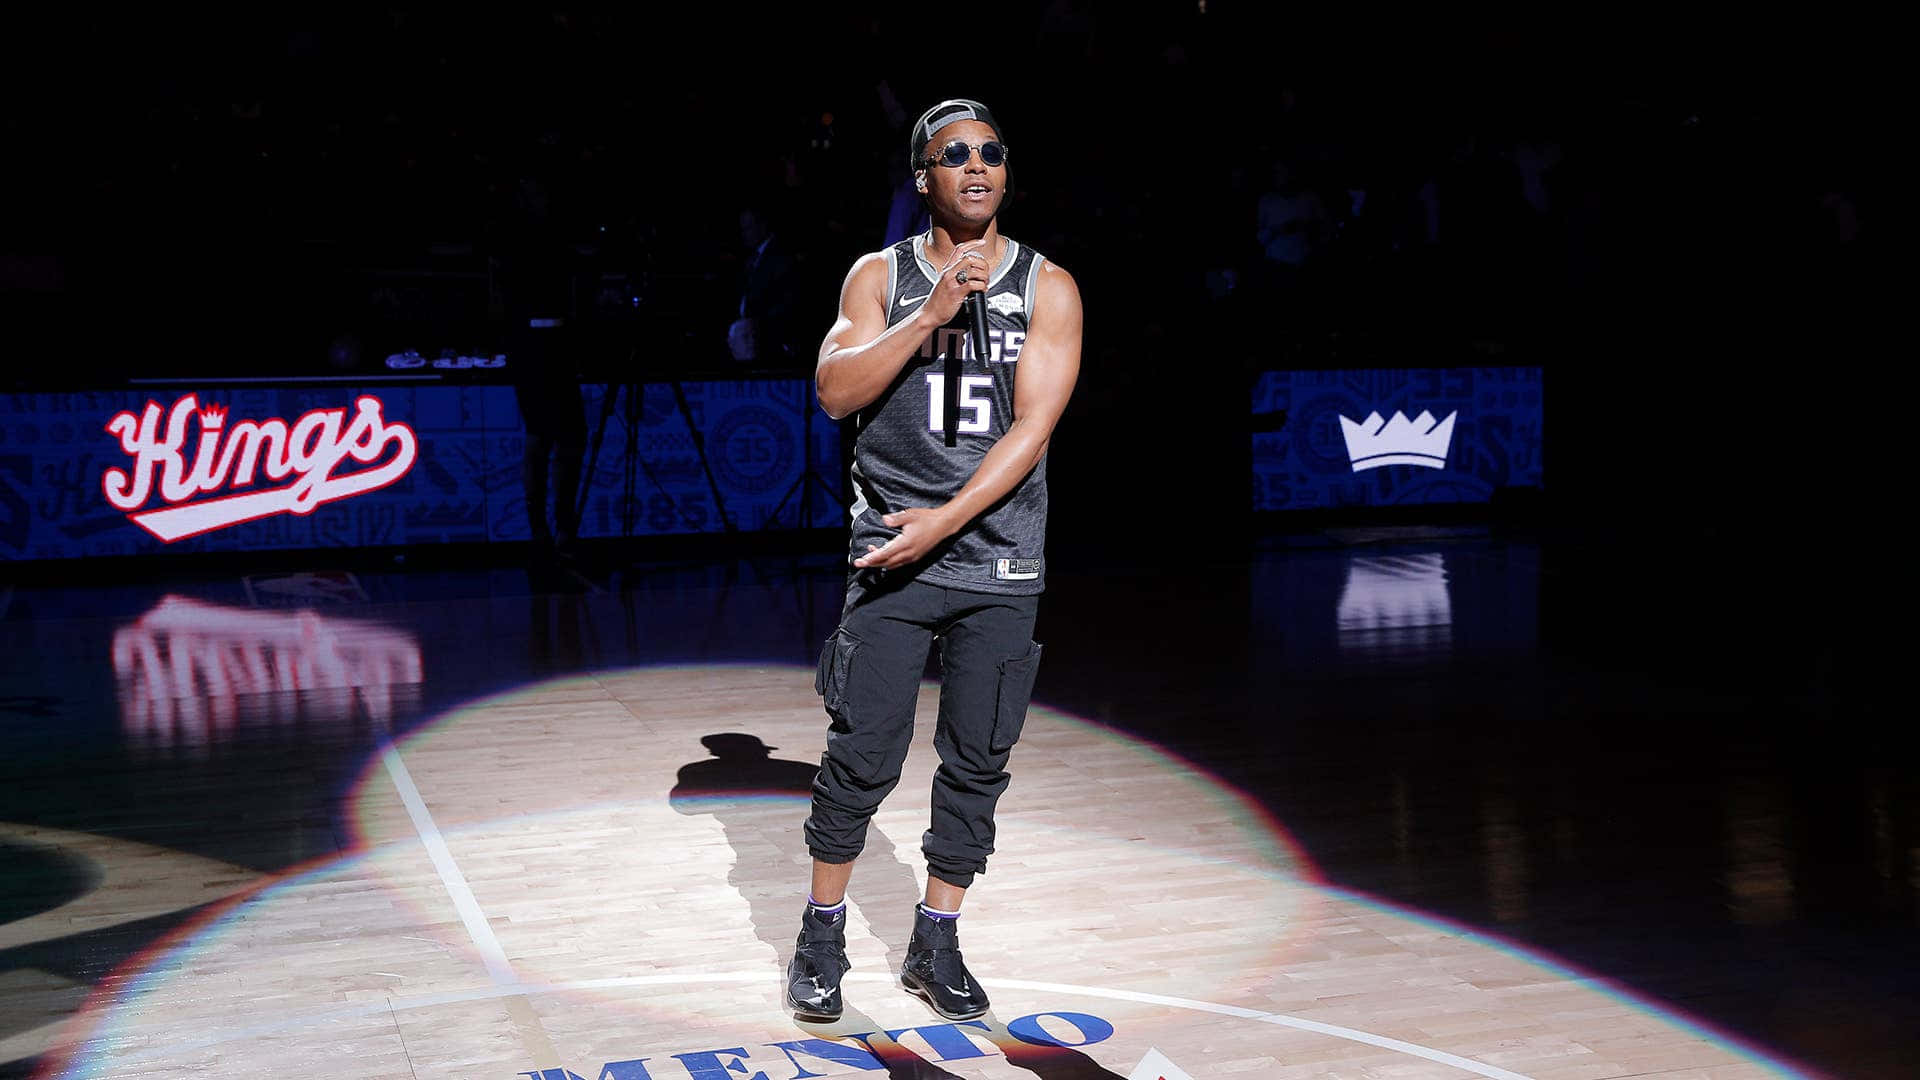 Lupe Fiasco Performanceat Kings Event Wallpaper